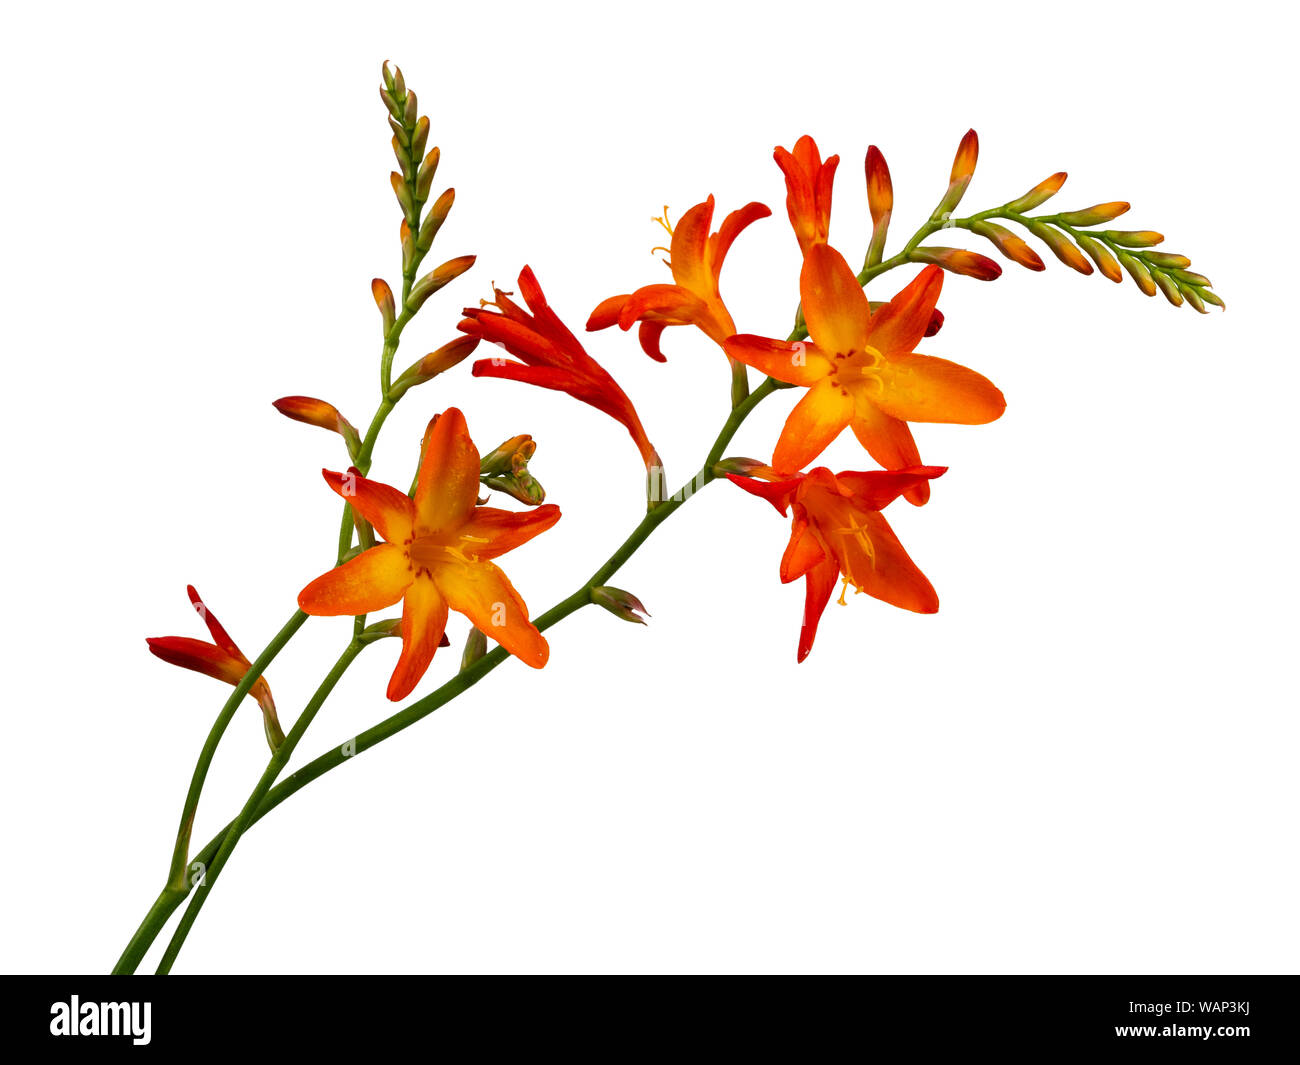 Single stem with flower spikes of the late summer flowering montbretia, Crocosmia x crocosmiiflora, on a white background Stock Photo